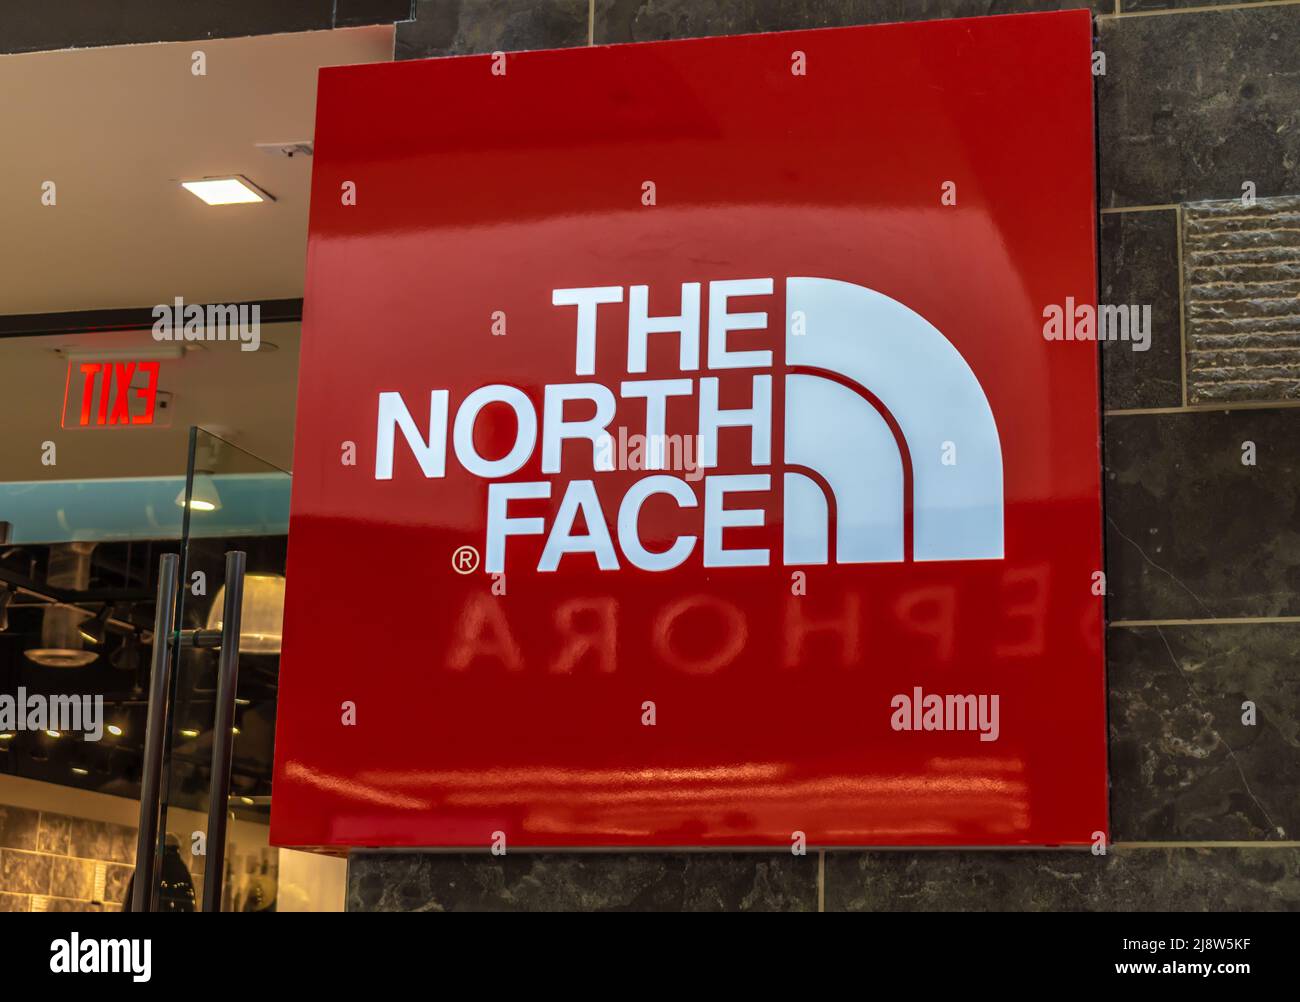 The North Face interior shopping mall brand and logo signage in red and  grey with reflections Stock Photo - Alamy